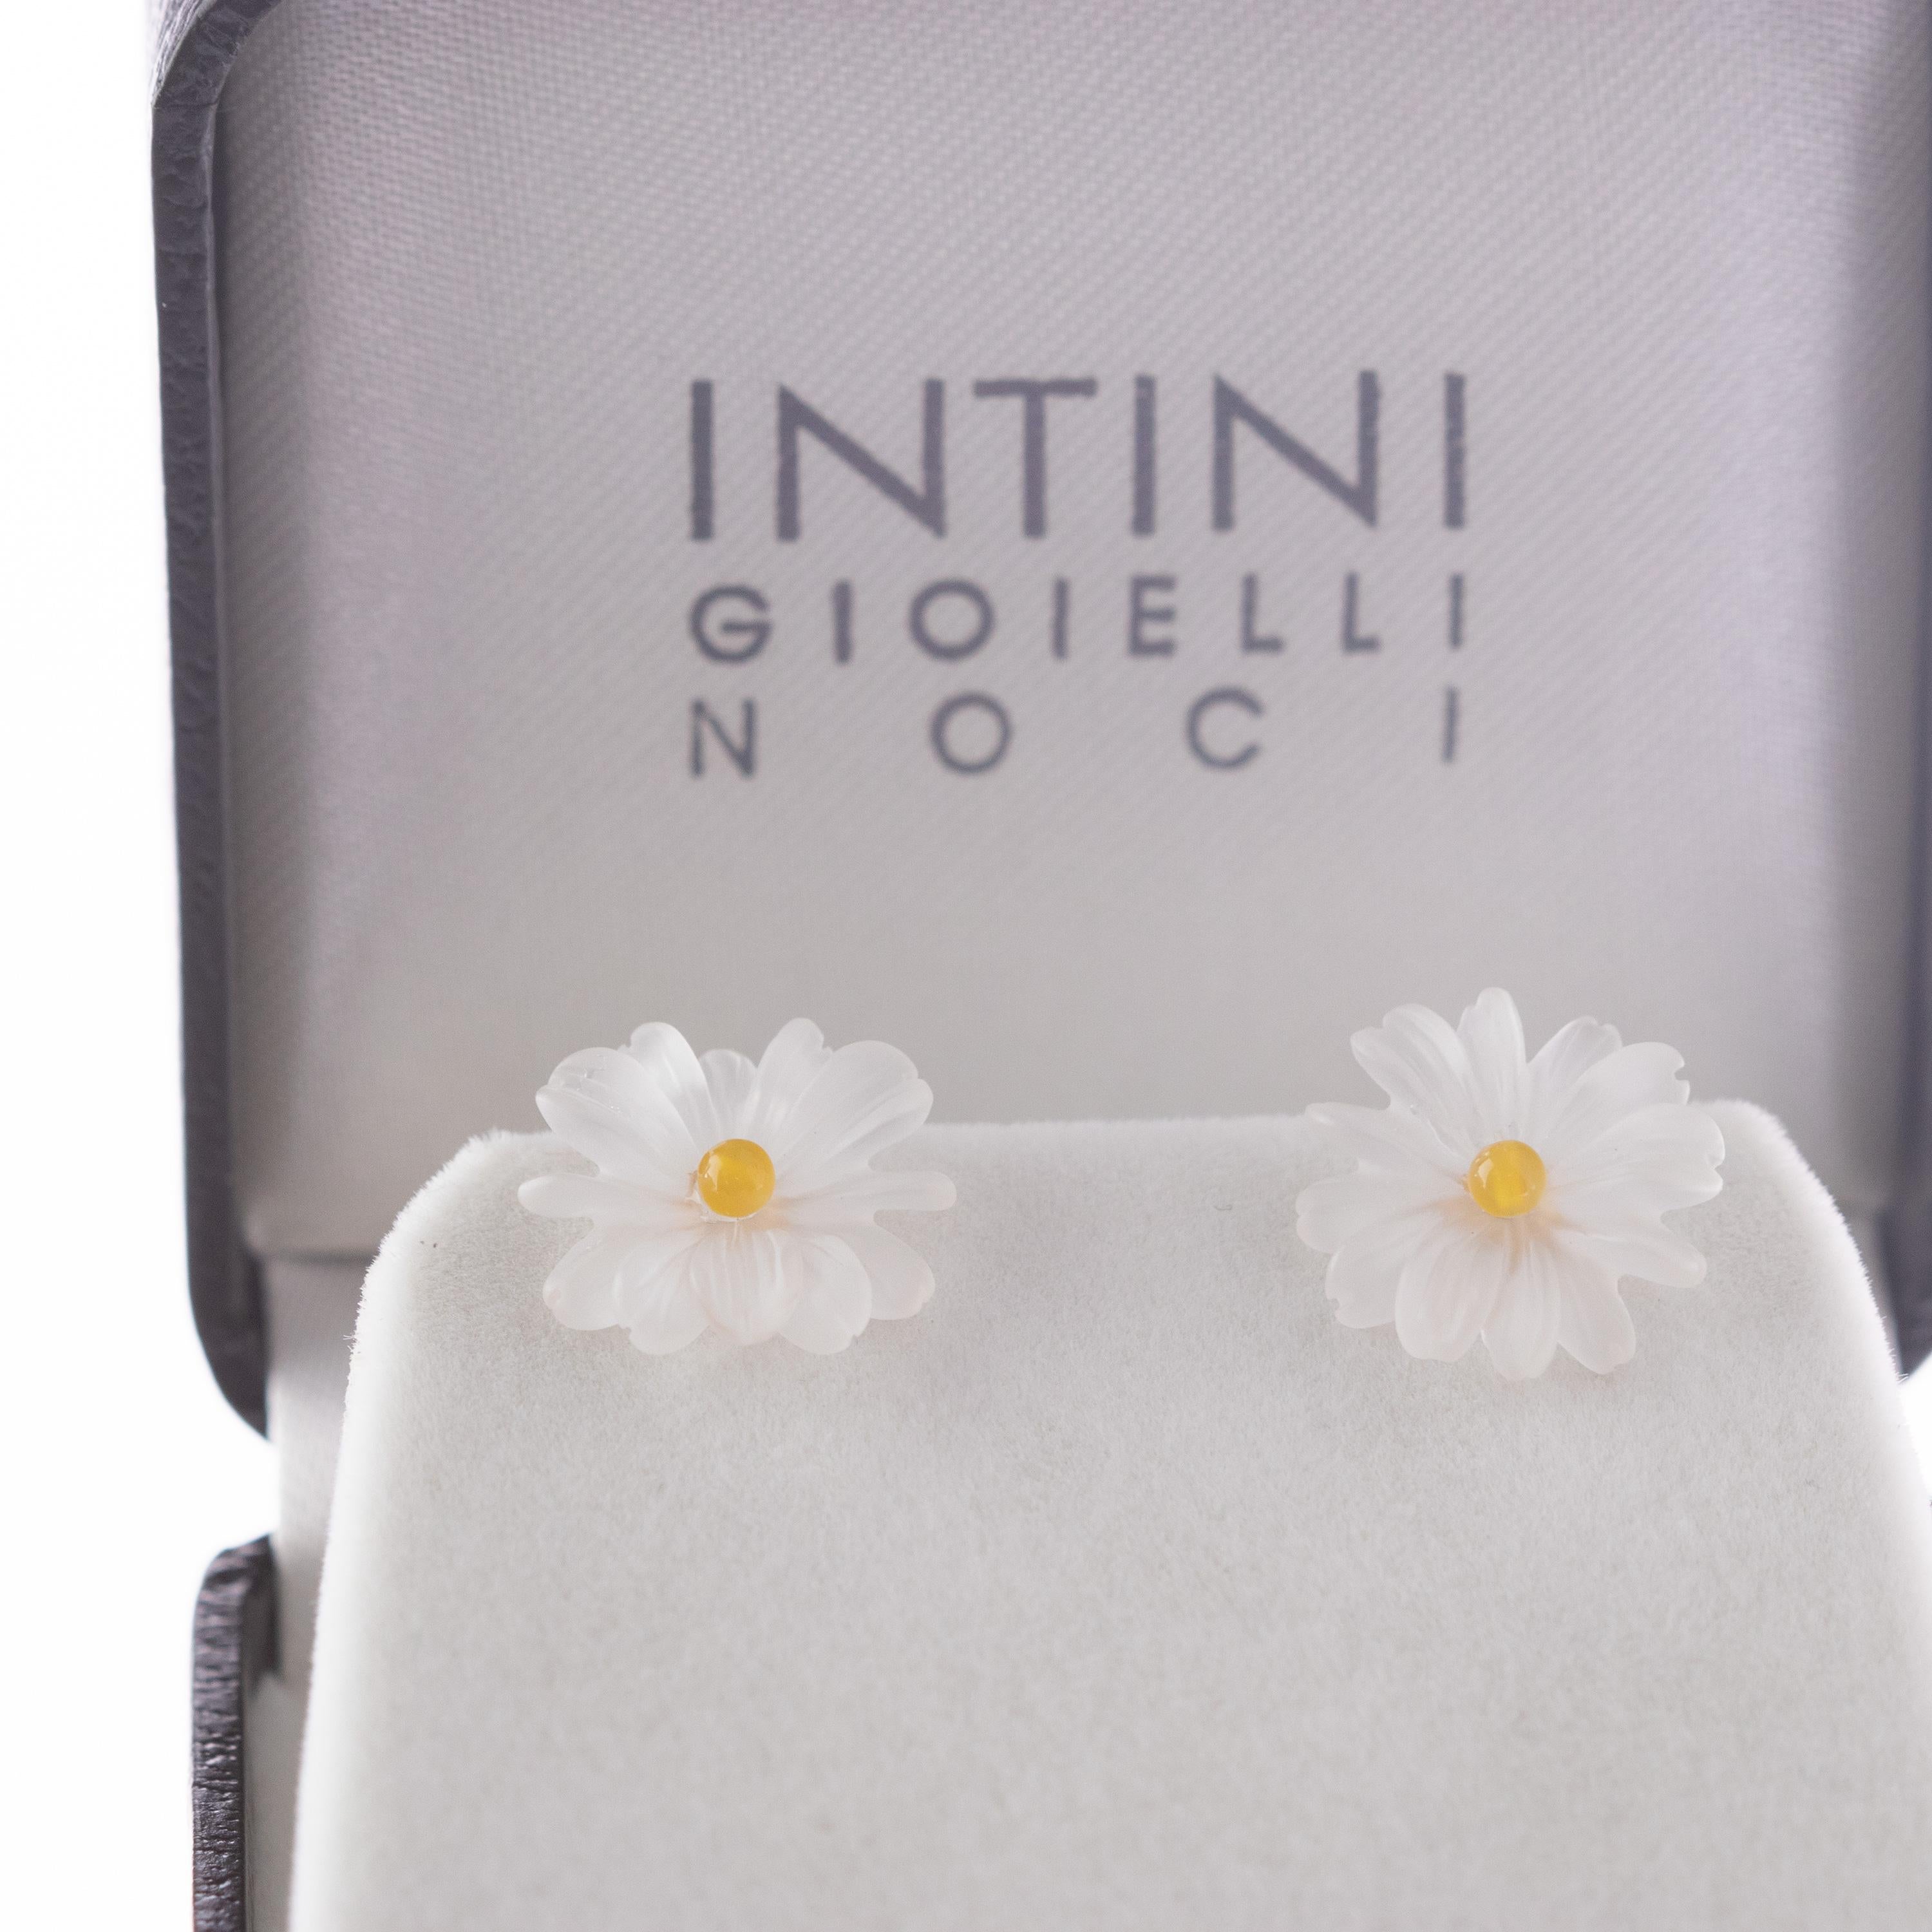 Astonishing and delicate 5.5 ct rock crystal flower. Stud earrings with a small yellow agate bead in the middle. Carved petals that evoke the italian handmade traditional jewelry work, wrapping itself in a soft look enriched with filled gold